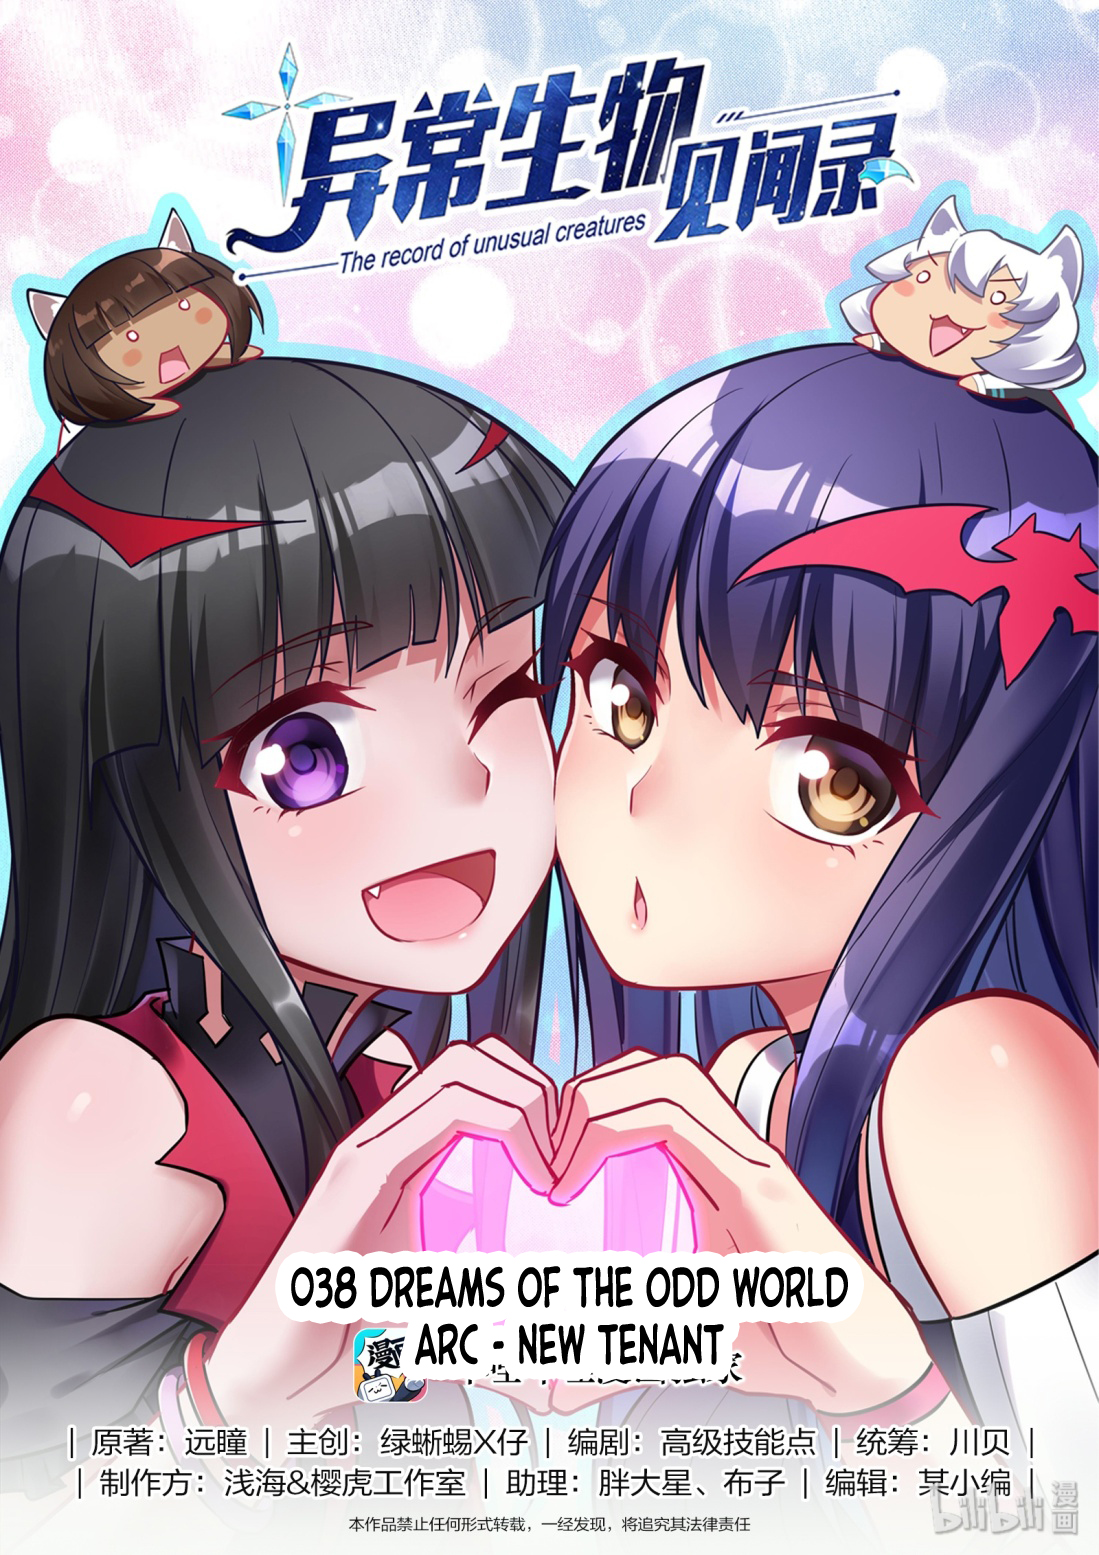 The Record of Unusual Creatures Ch. 38 Dreams of the odd world arc new tenant